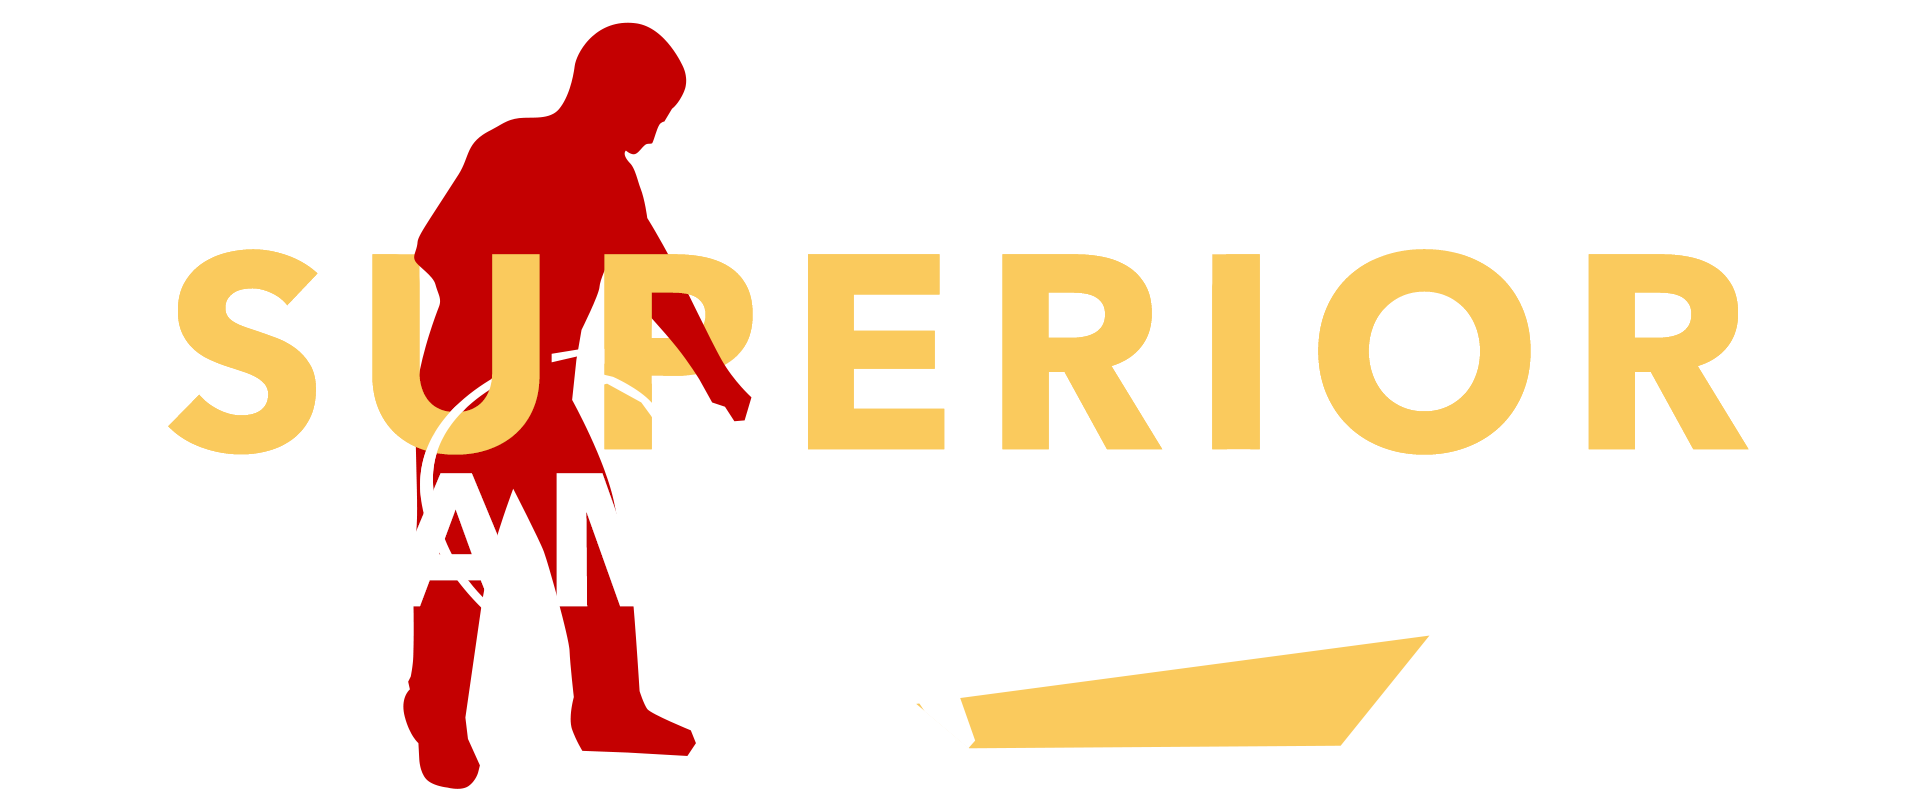 Superior Steam Cleaning